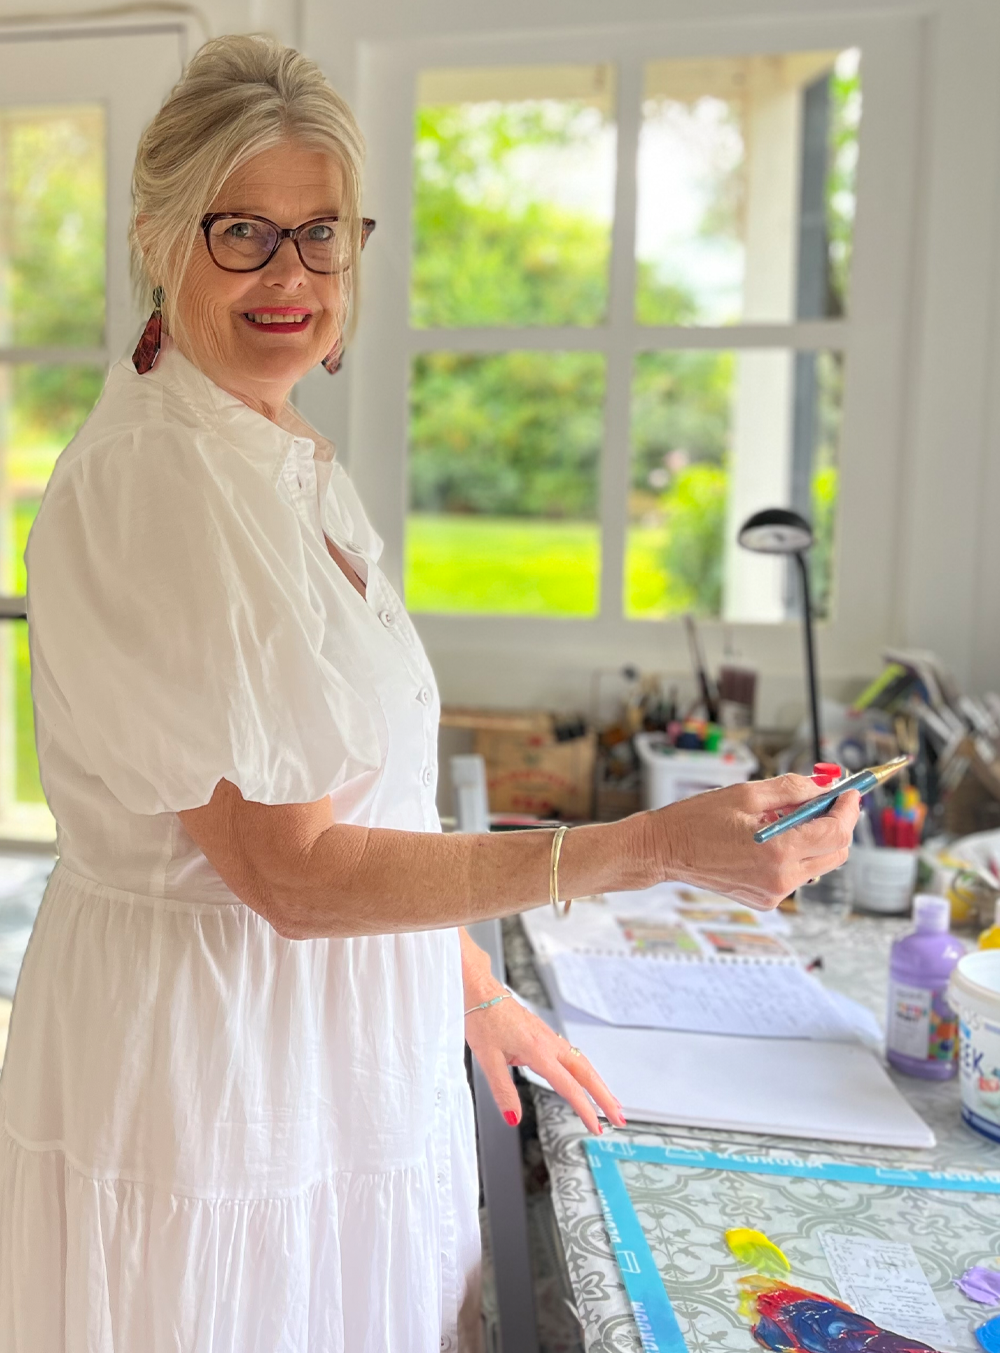 Meet artist and children's book author and illustrator Catherine Beach